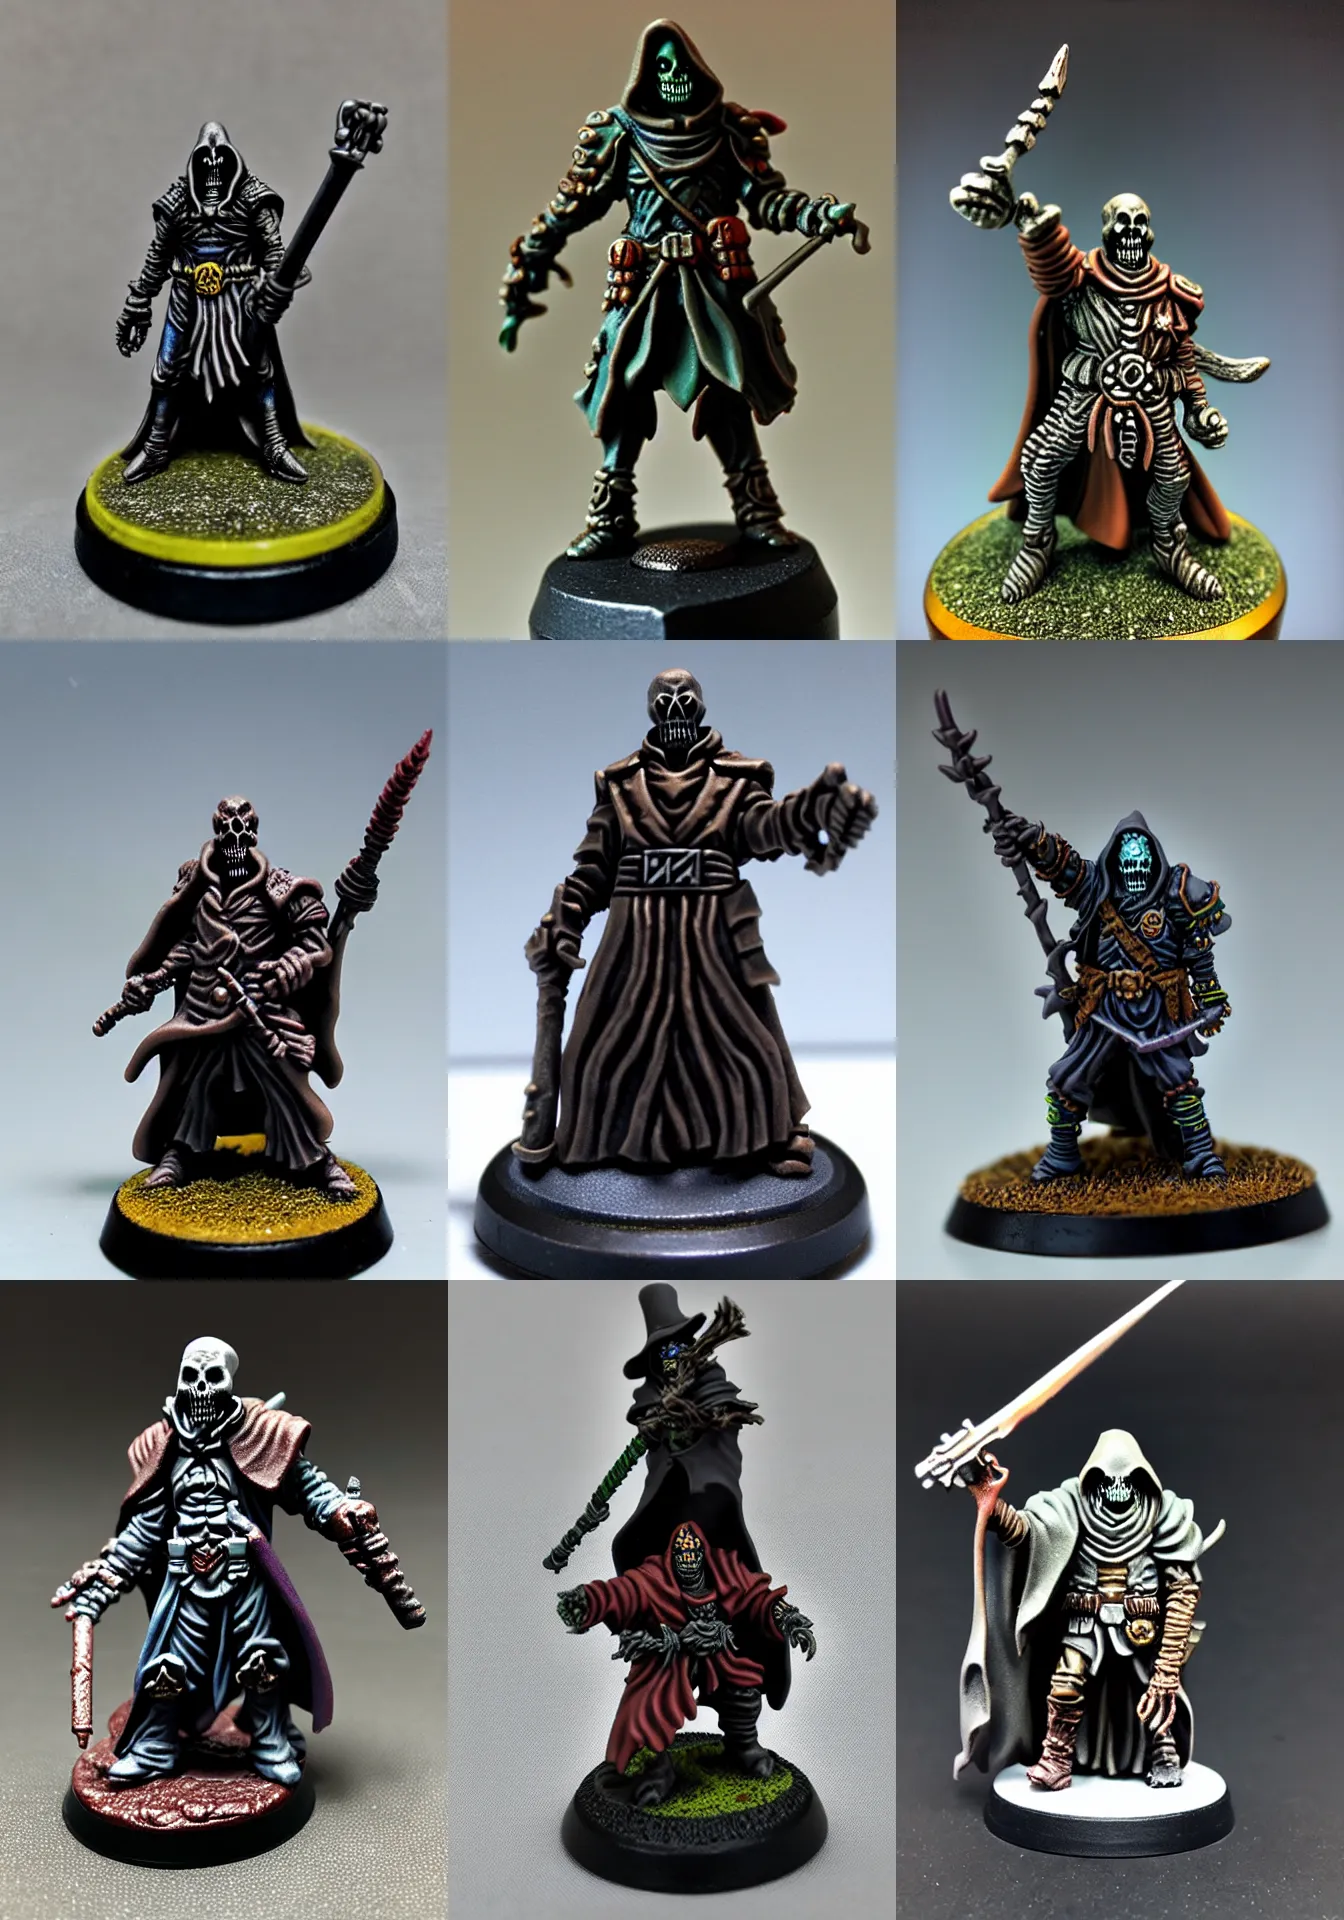 Prompt: undead lich ronald reagan, resin miniature, 2 8 mm heroic scale, games workshop, human mage, citadel colour, glowing eyes, osl, nmm, r / paintedminis, round base, fantasy ttrpg villain, dungeons and dragons, reaper minis